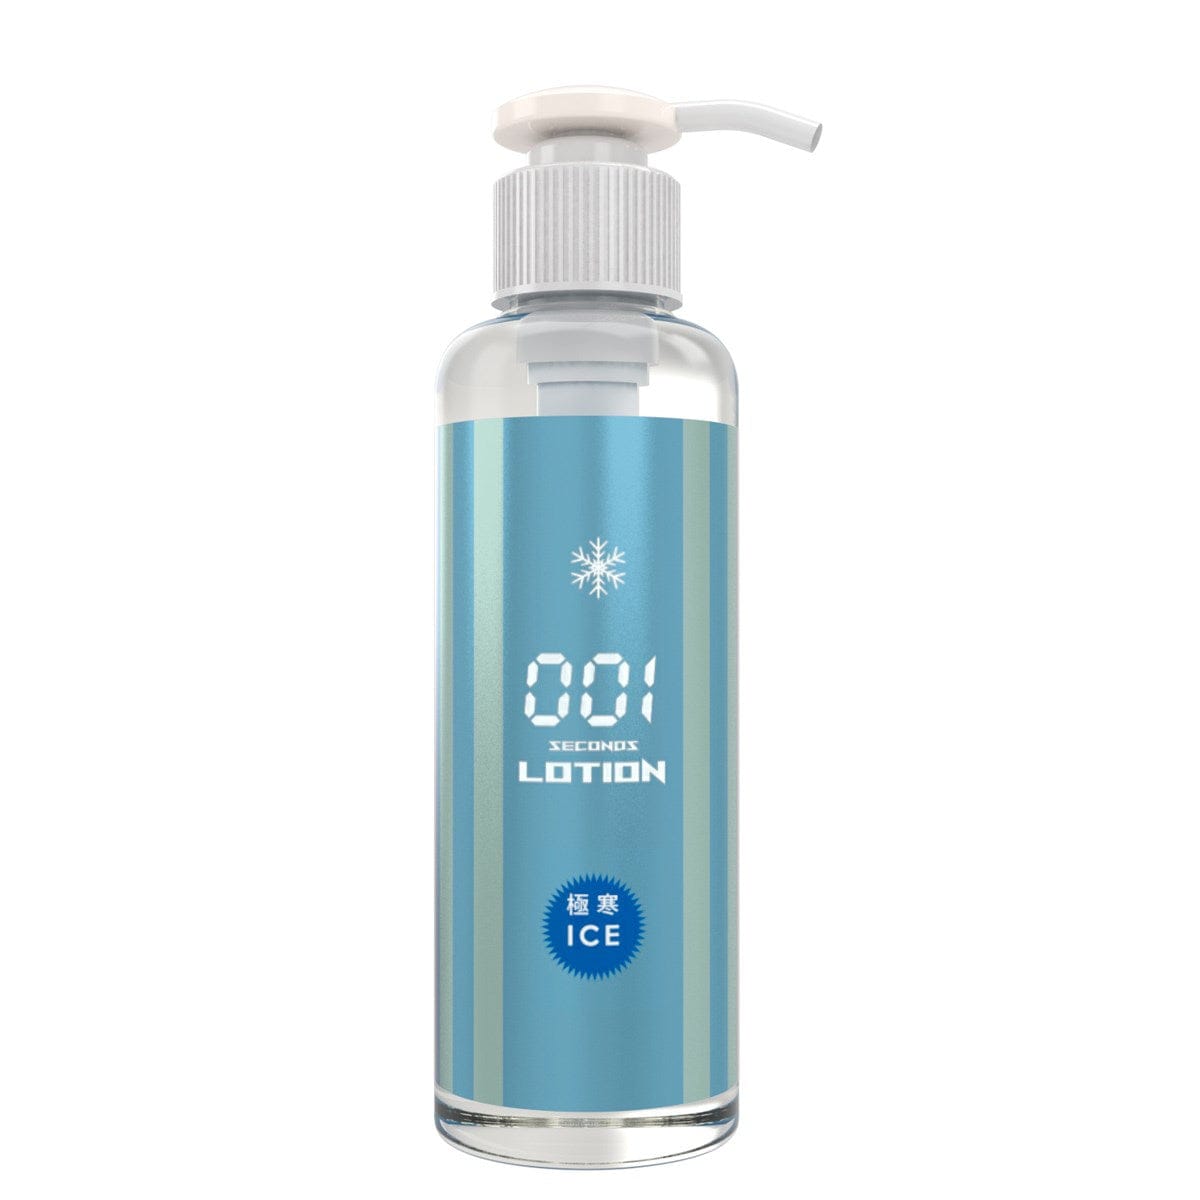 SSI Japan - Wash Free Lotion Gokukan 001 Second Lubricant Ice Type 180ml Cooling Lube 621241296 CherryAffairs